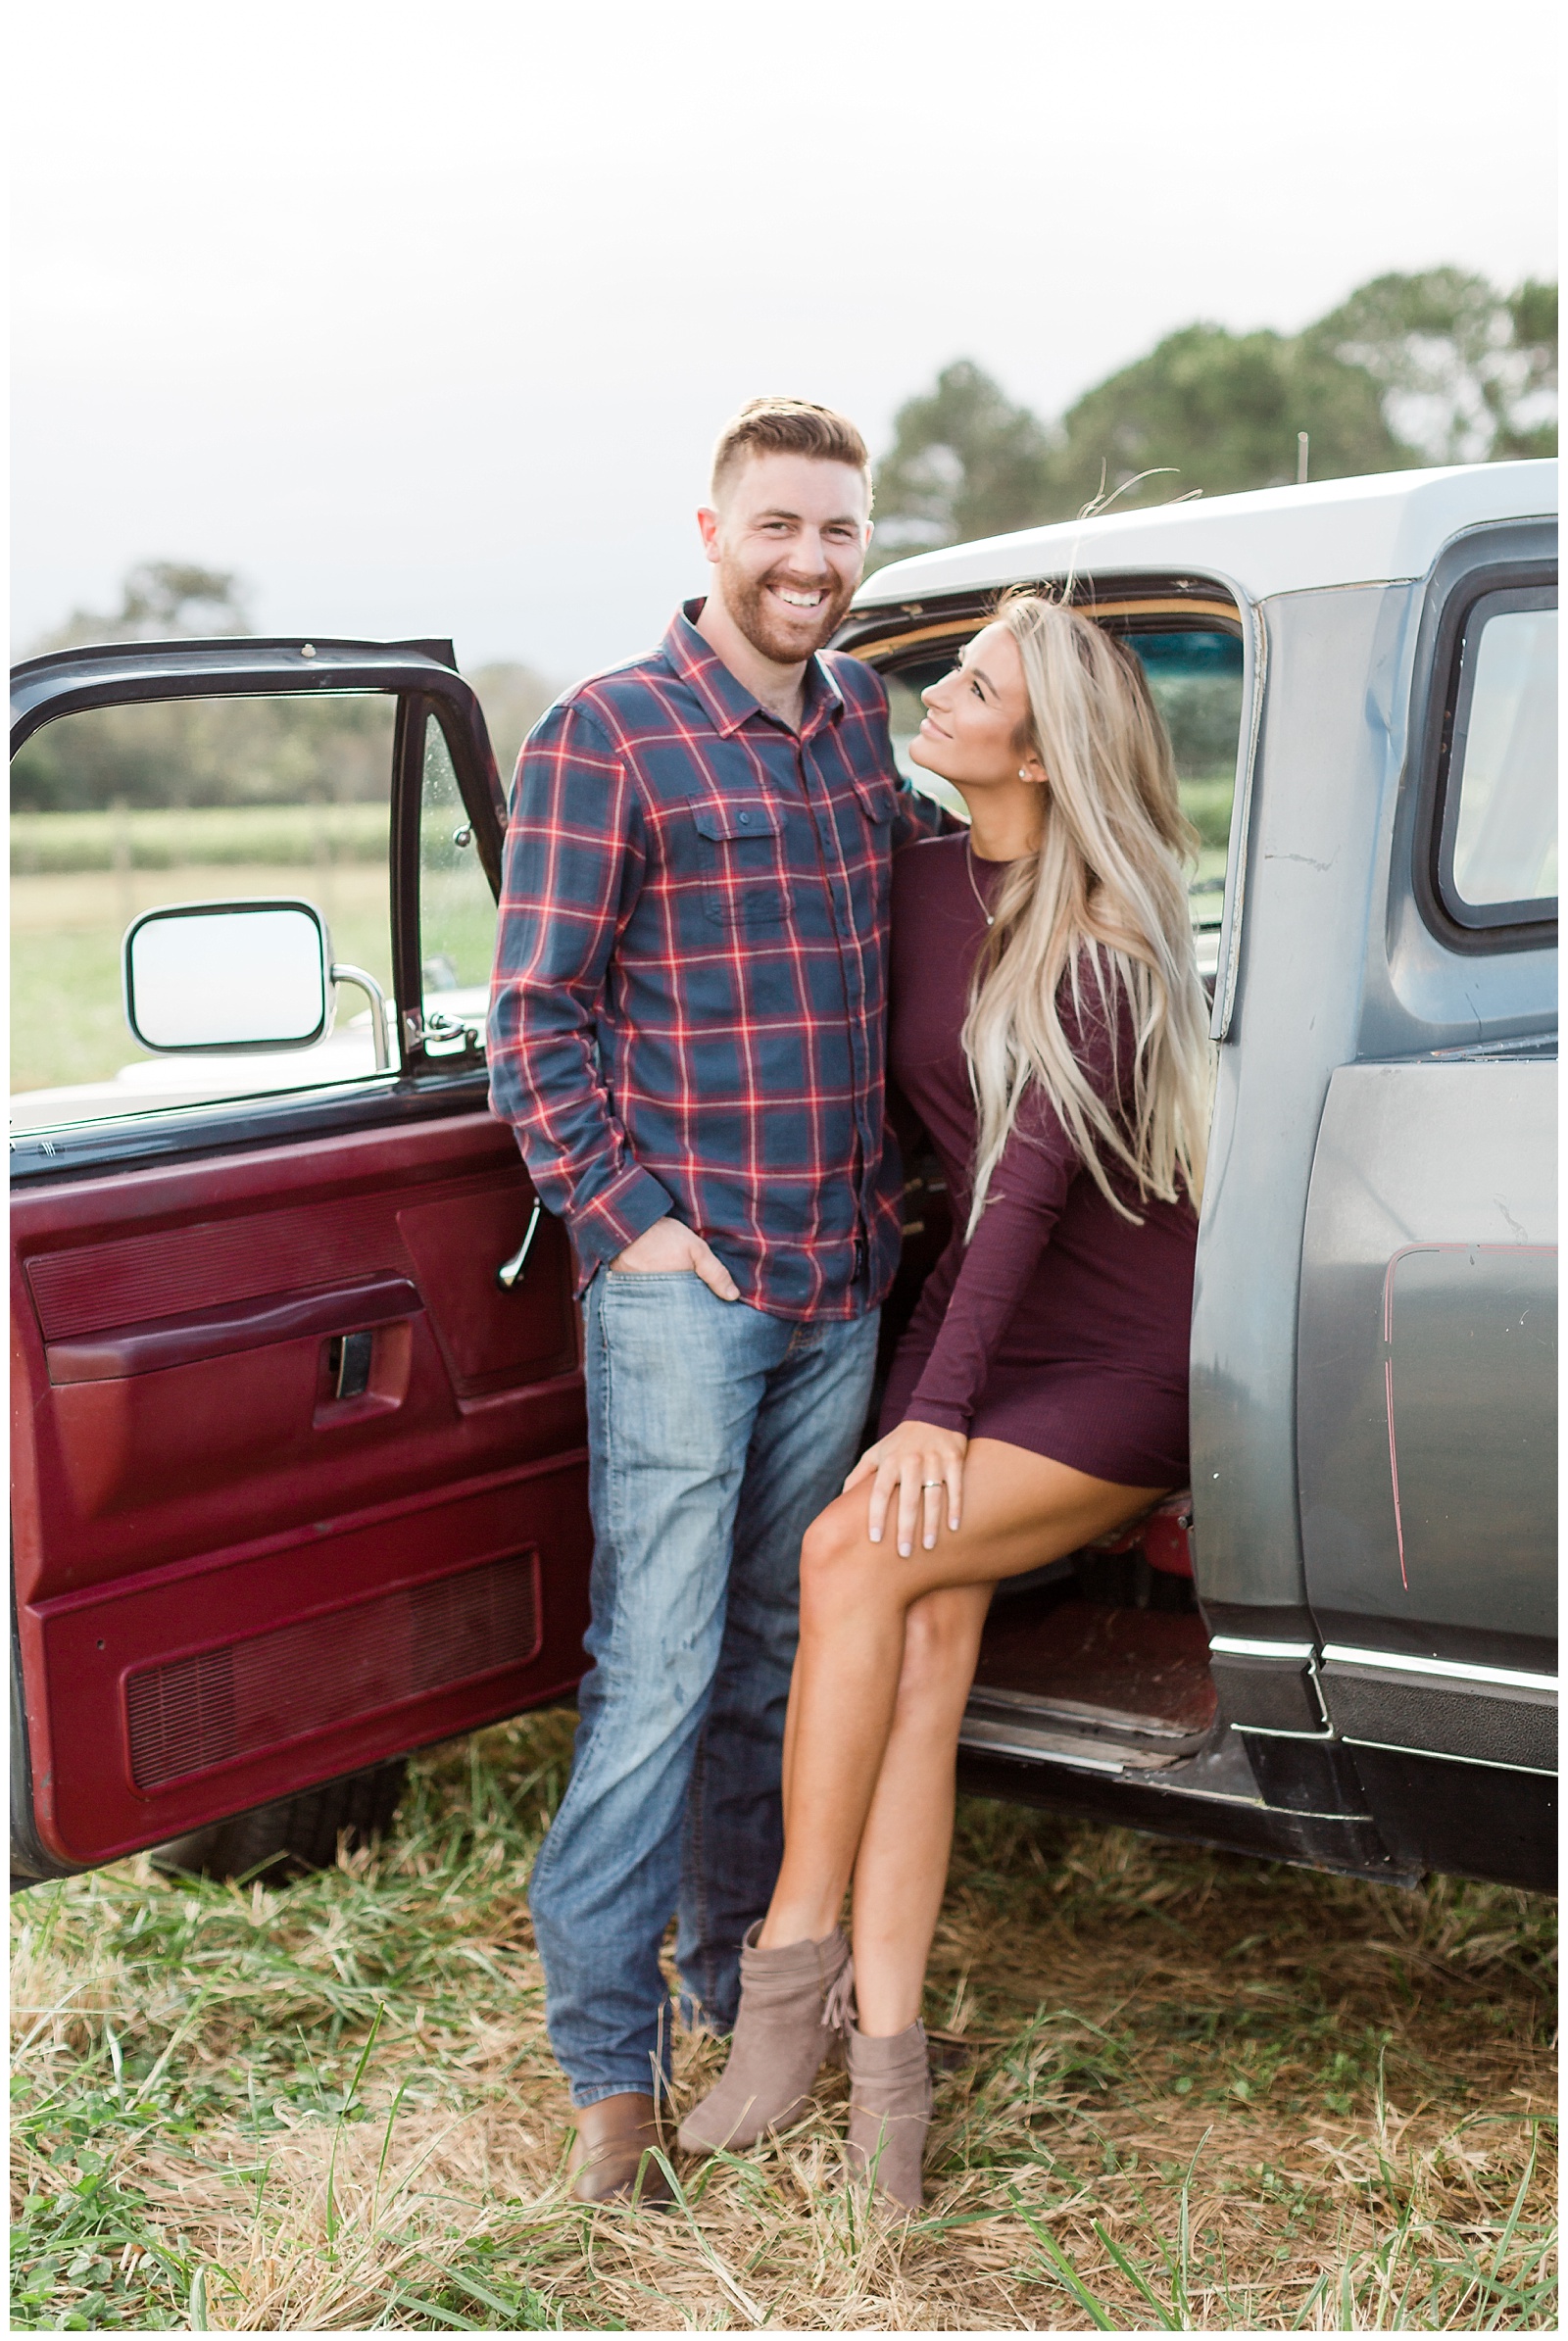 cullipher-farms-engagement-session-12.jpg